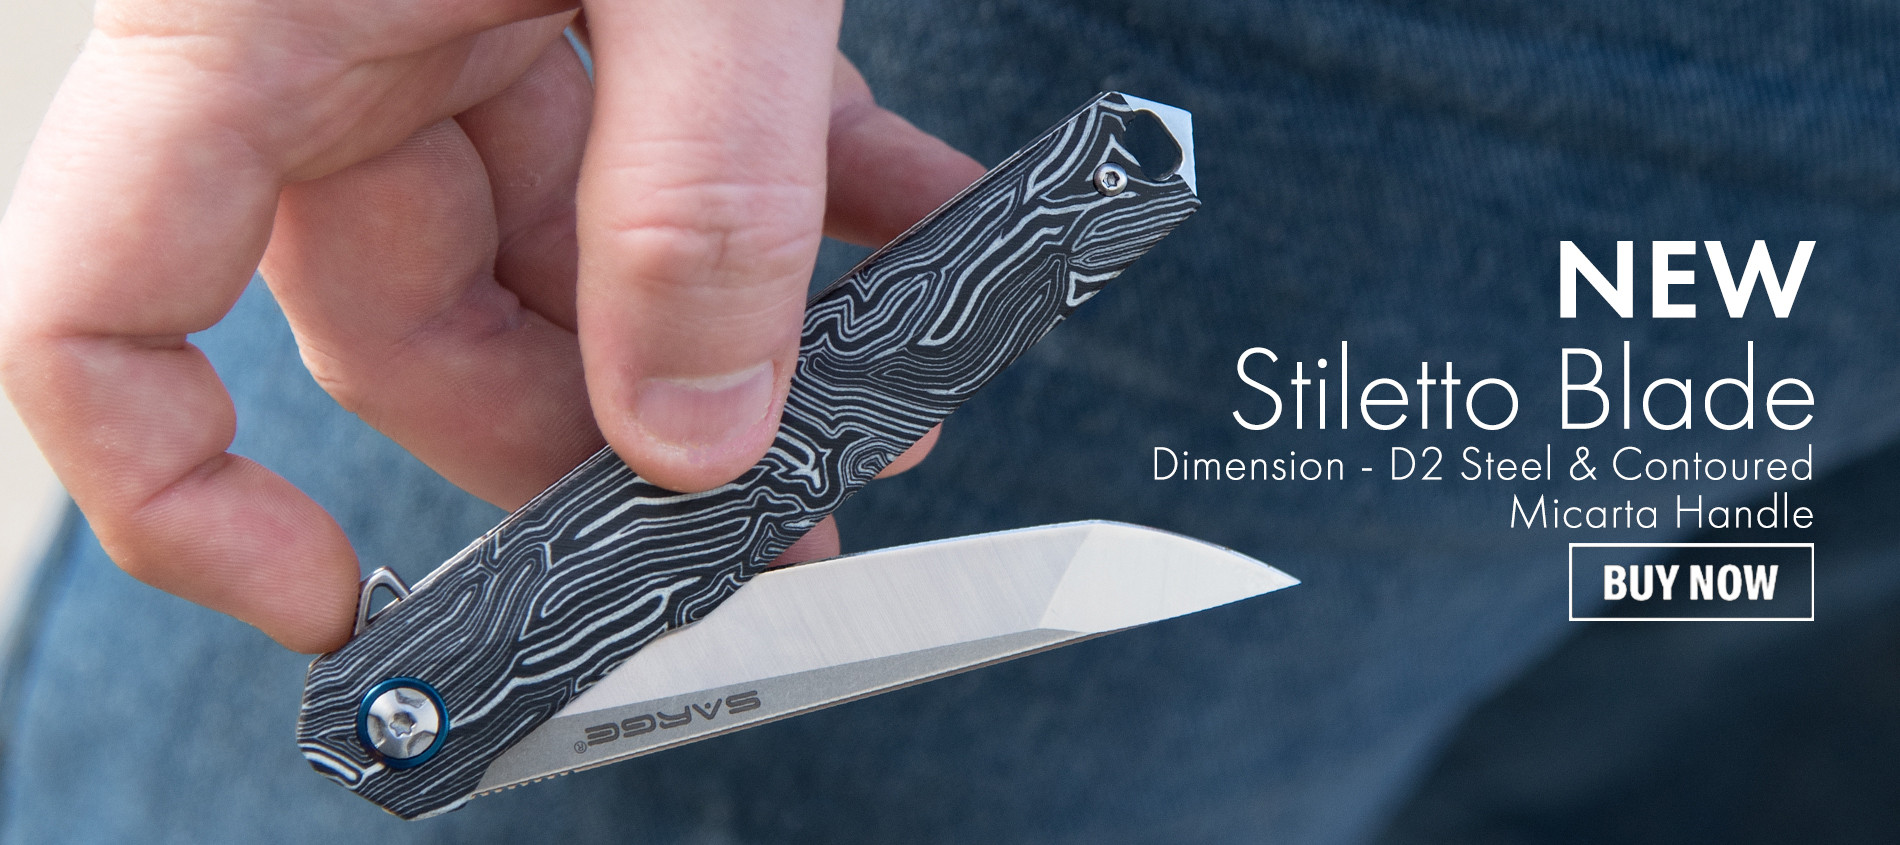 Coolina Knife Review - How Much Style can a Knife Have While Still Being  Efficient? - iReviews